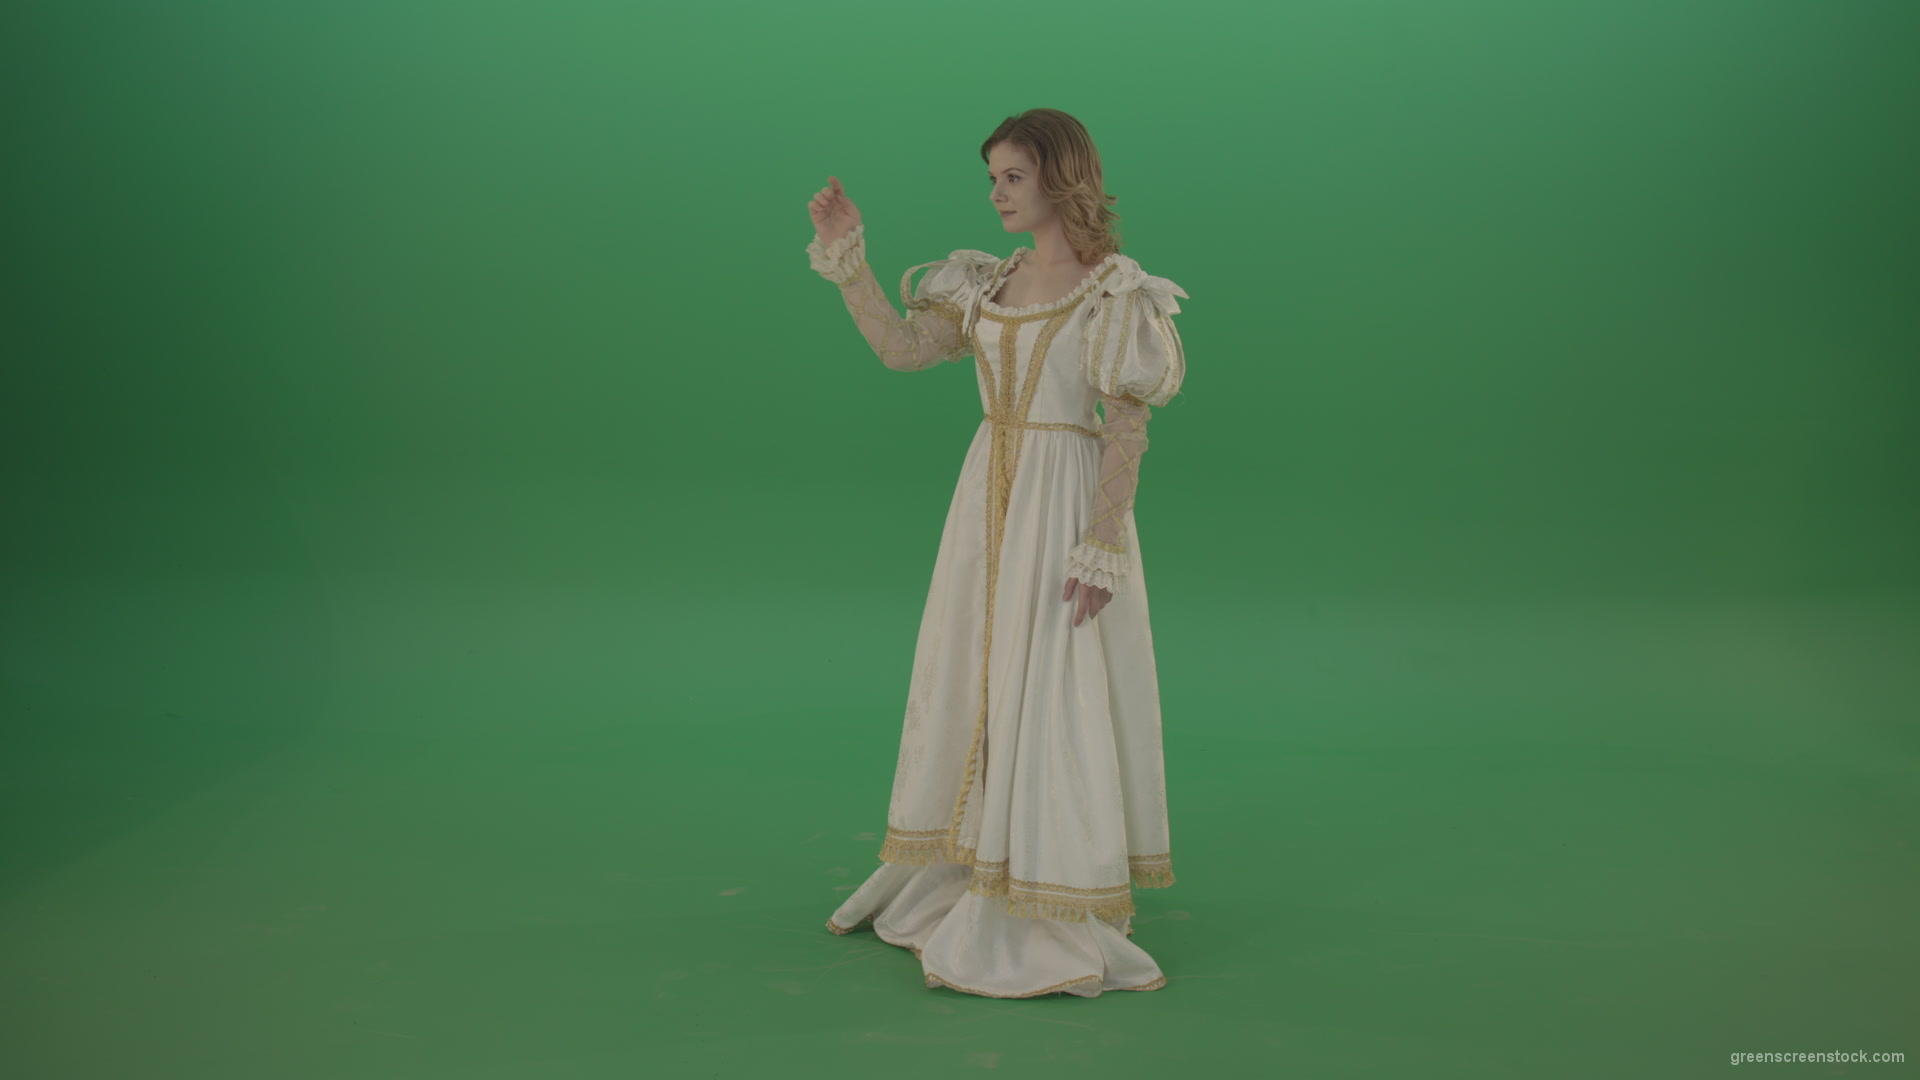 Finding-a-girl-on-the-touch-screen-is-looking-at-the-photo-with-pleasure-isolated-on-green-screen_004 Green Screen Stock